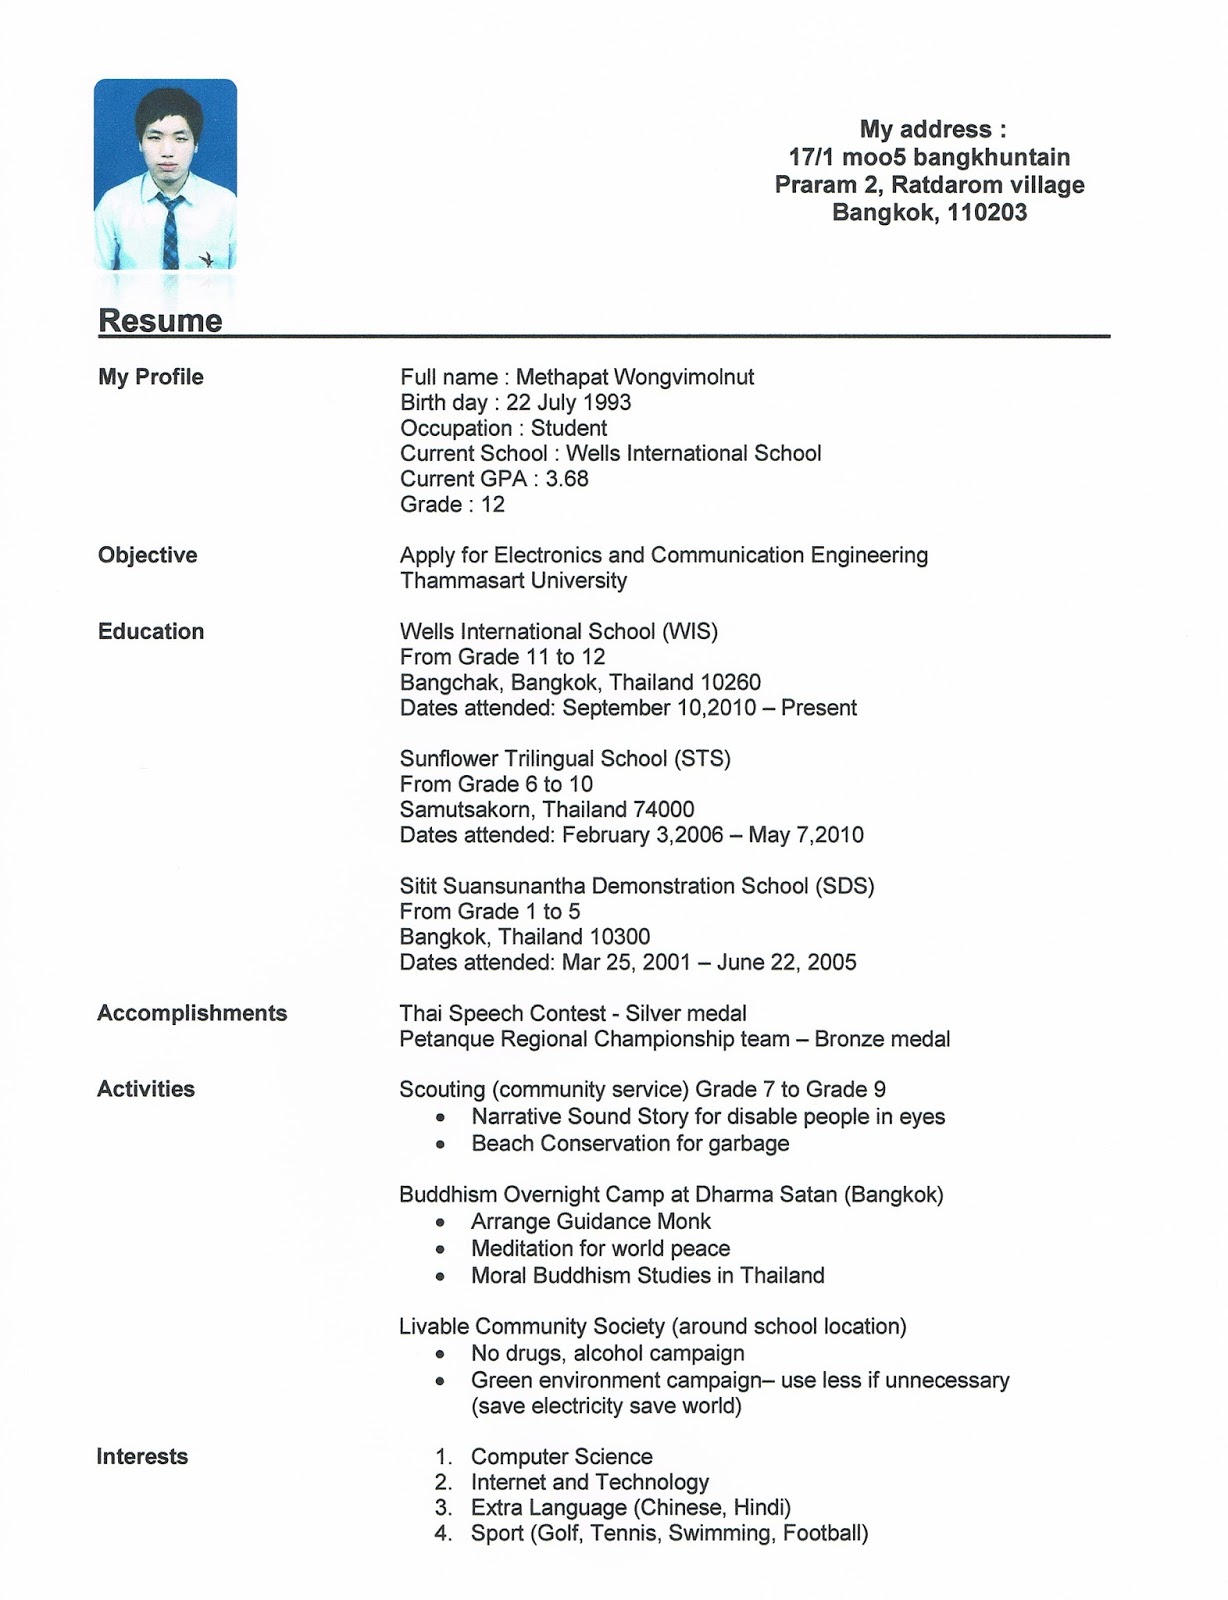 Sample resume for college students still in school